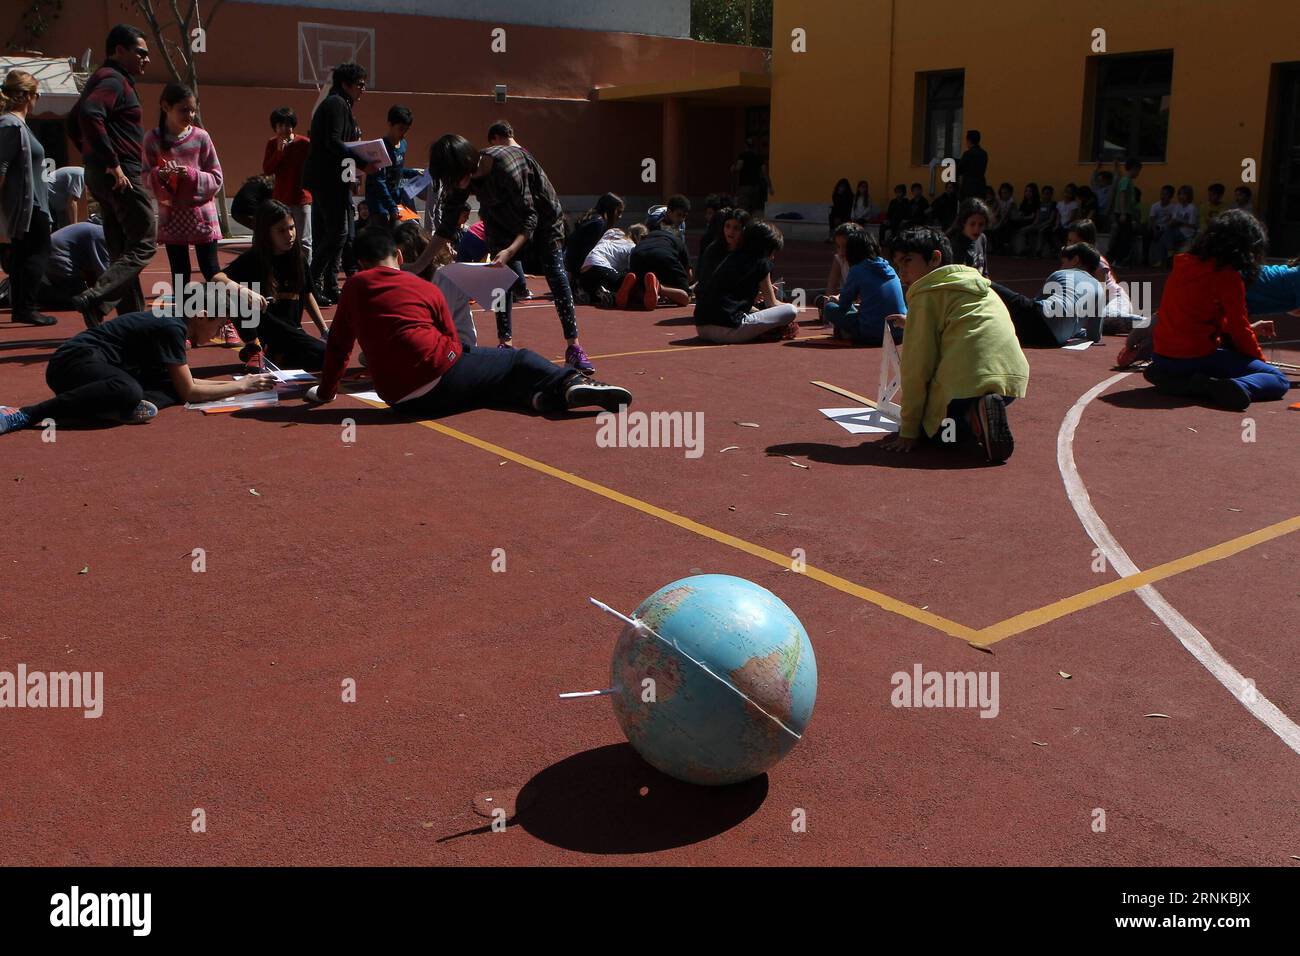 (170321) -- ATHENS, March 21, 2017 -- Greek students calculate the Earth s circumference at midday in Athens, Greece, March 20, 2017. Students in about 450 schools across Greece greeted on Monday the Spring Equinox which marks the beginning of the season, recalculating the Earth s circumference, repeating the experiment of the famous ancient Greek mathematician, astronomer and geographer Eratosthenes. ) (zjy) GREECE-ATHENS-STUDENT EXPERIMENT-EARTH S CIRCUMFERENCE-RECALCULATION MariosxLolos PUBLICATIONxNOTxINxCHN   Athens March 21 2017 Greek Students calculate The Earth S circumference AT midda Stock Photo